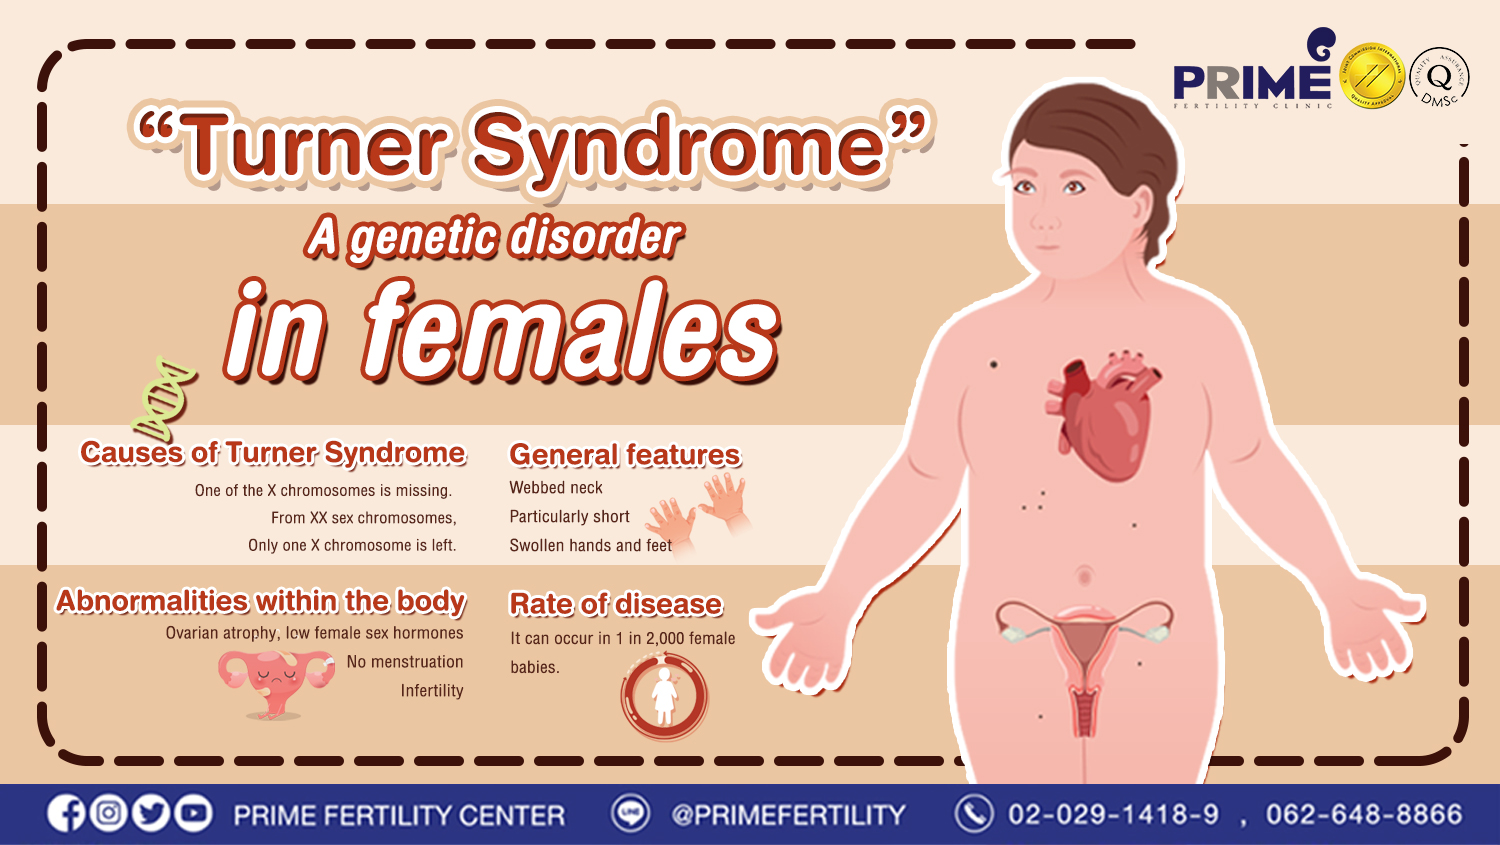 Turner Syndrome: A genetic disorder in females